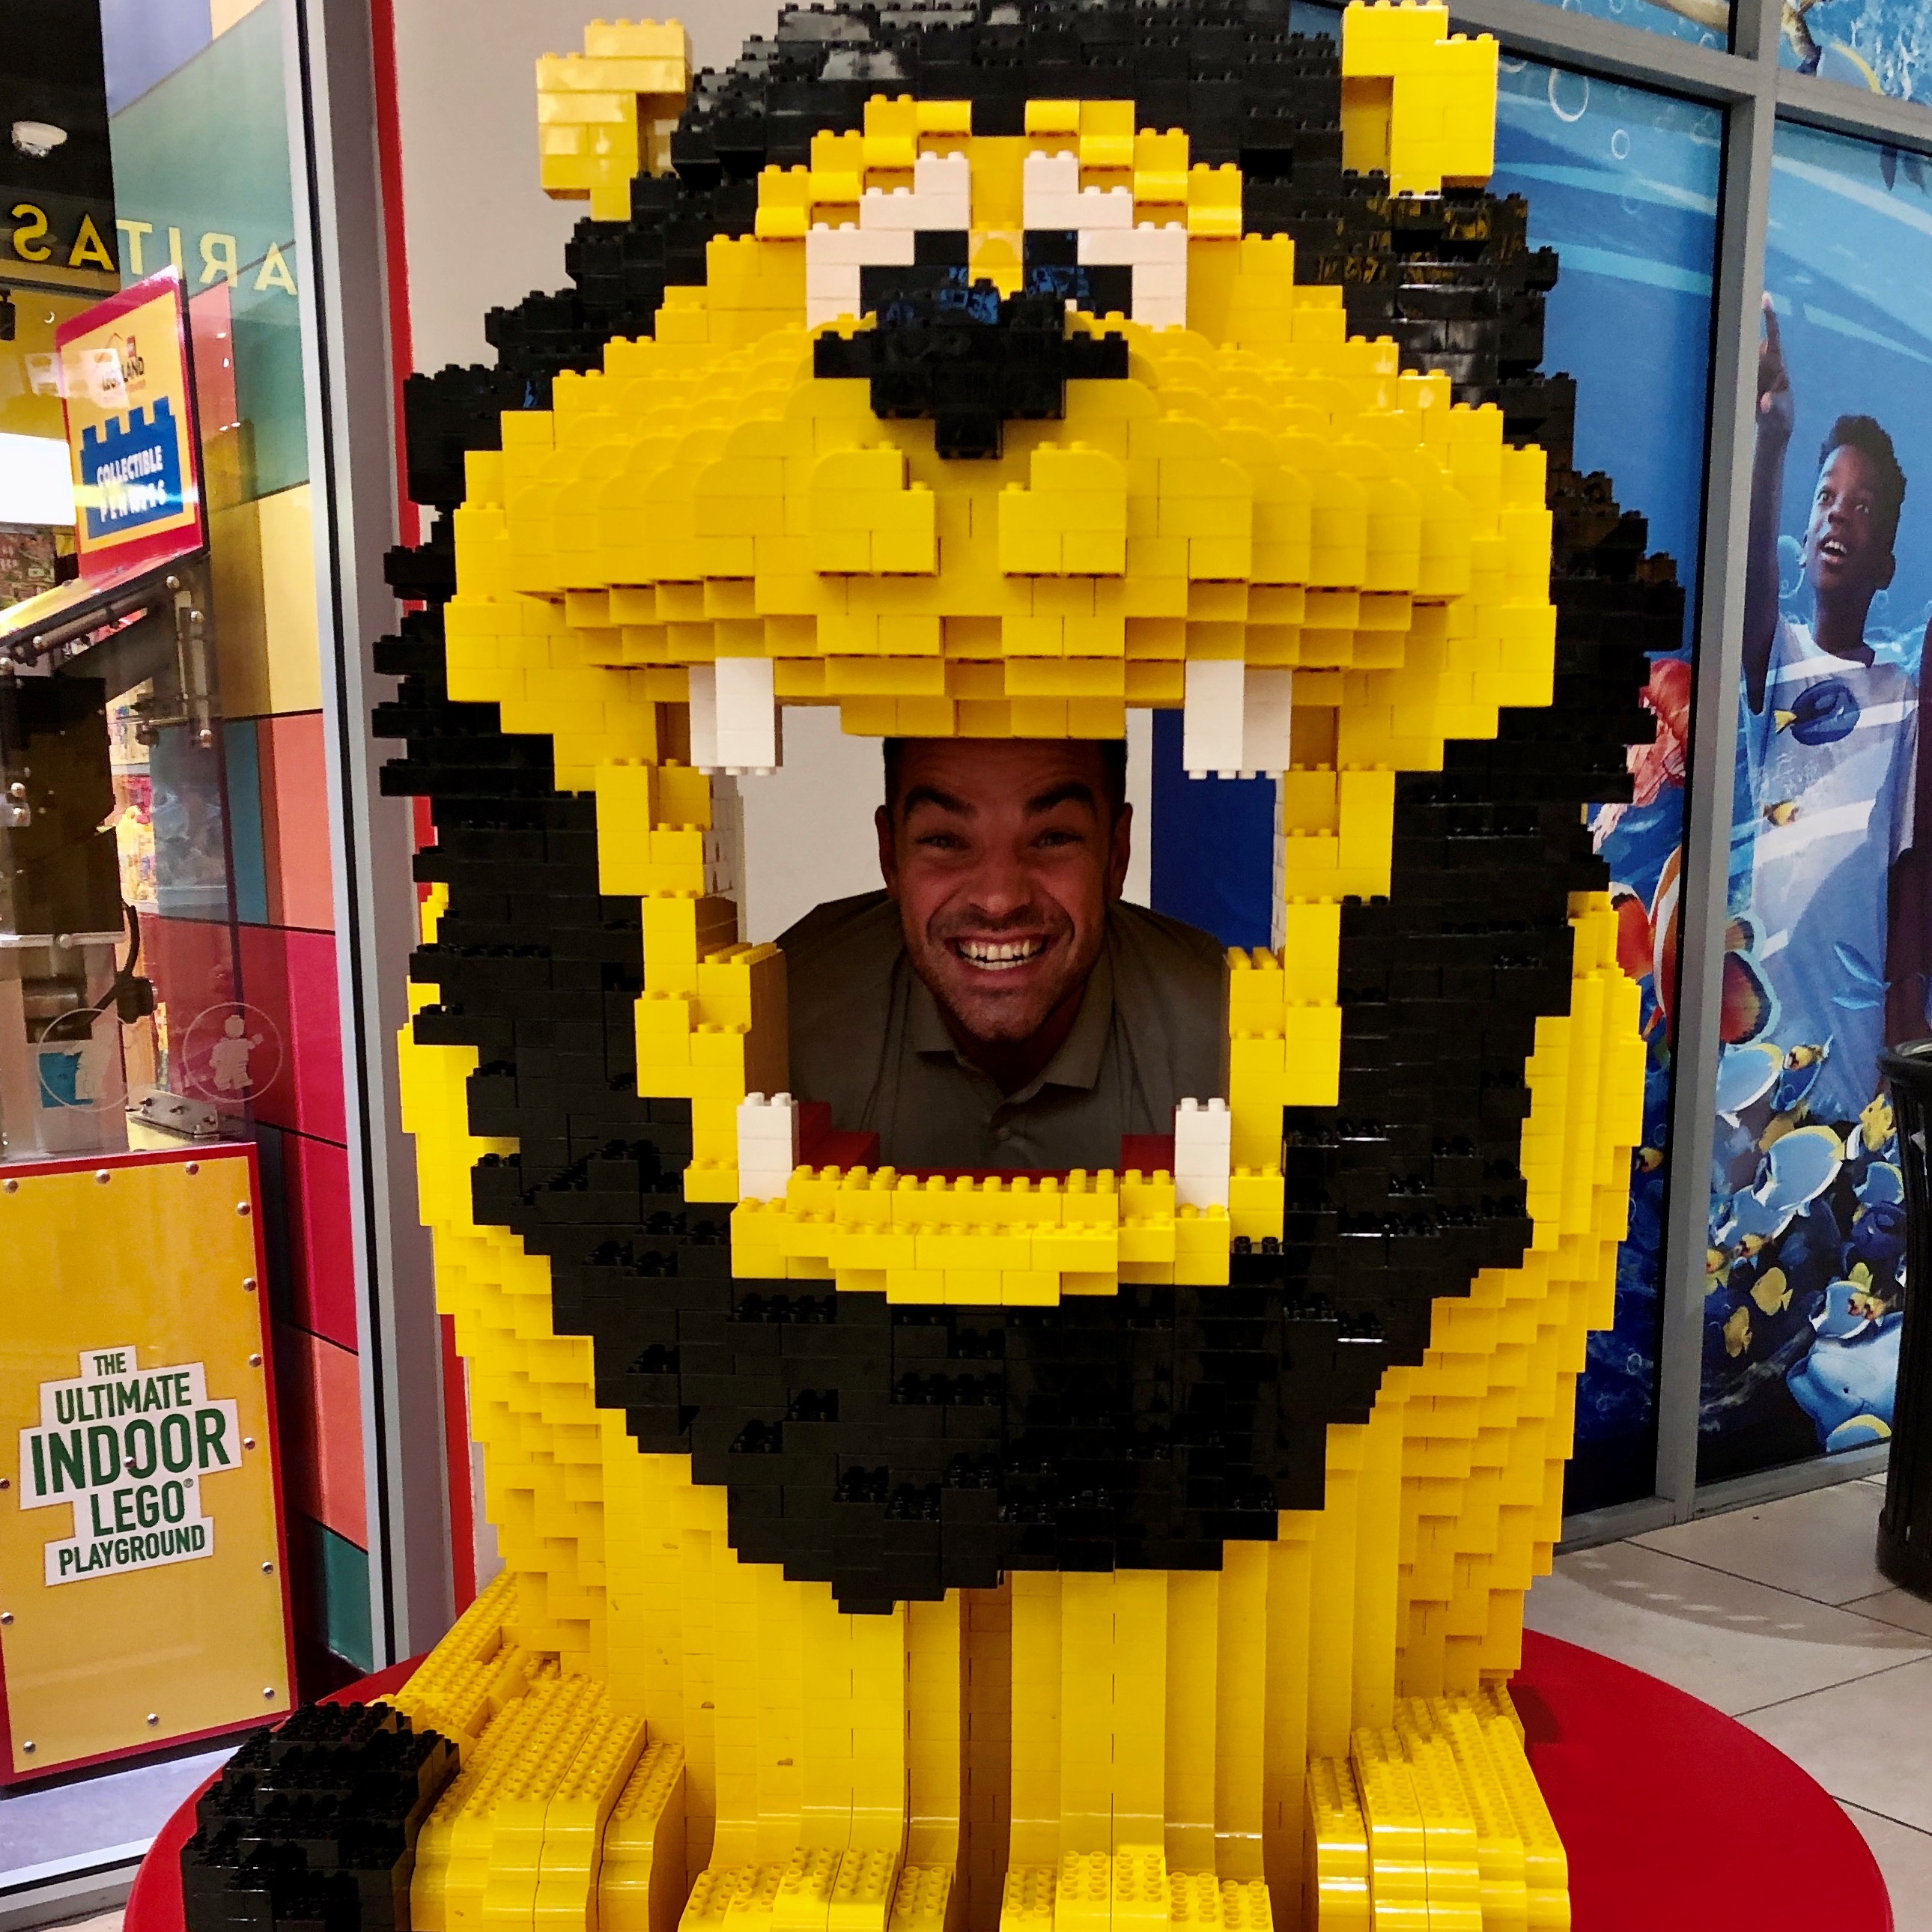 Adult Nights are bricktastic at LEGOLAND Discovery Center!